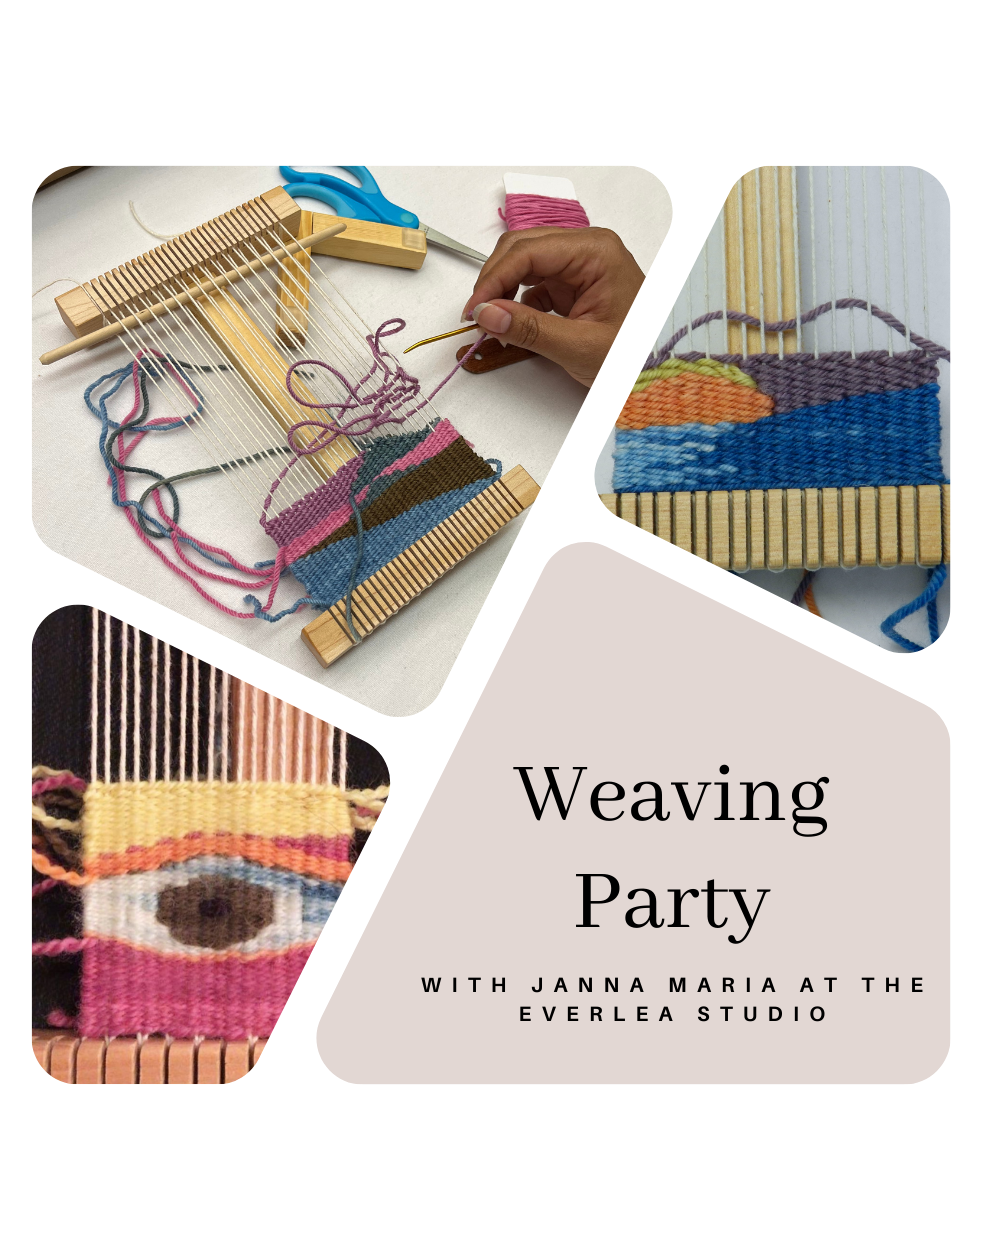 Weaving Party! Tuesday July 25th